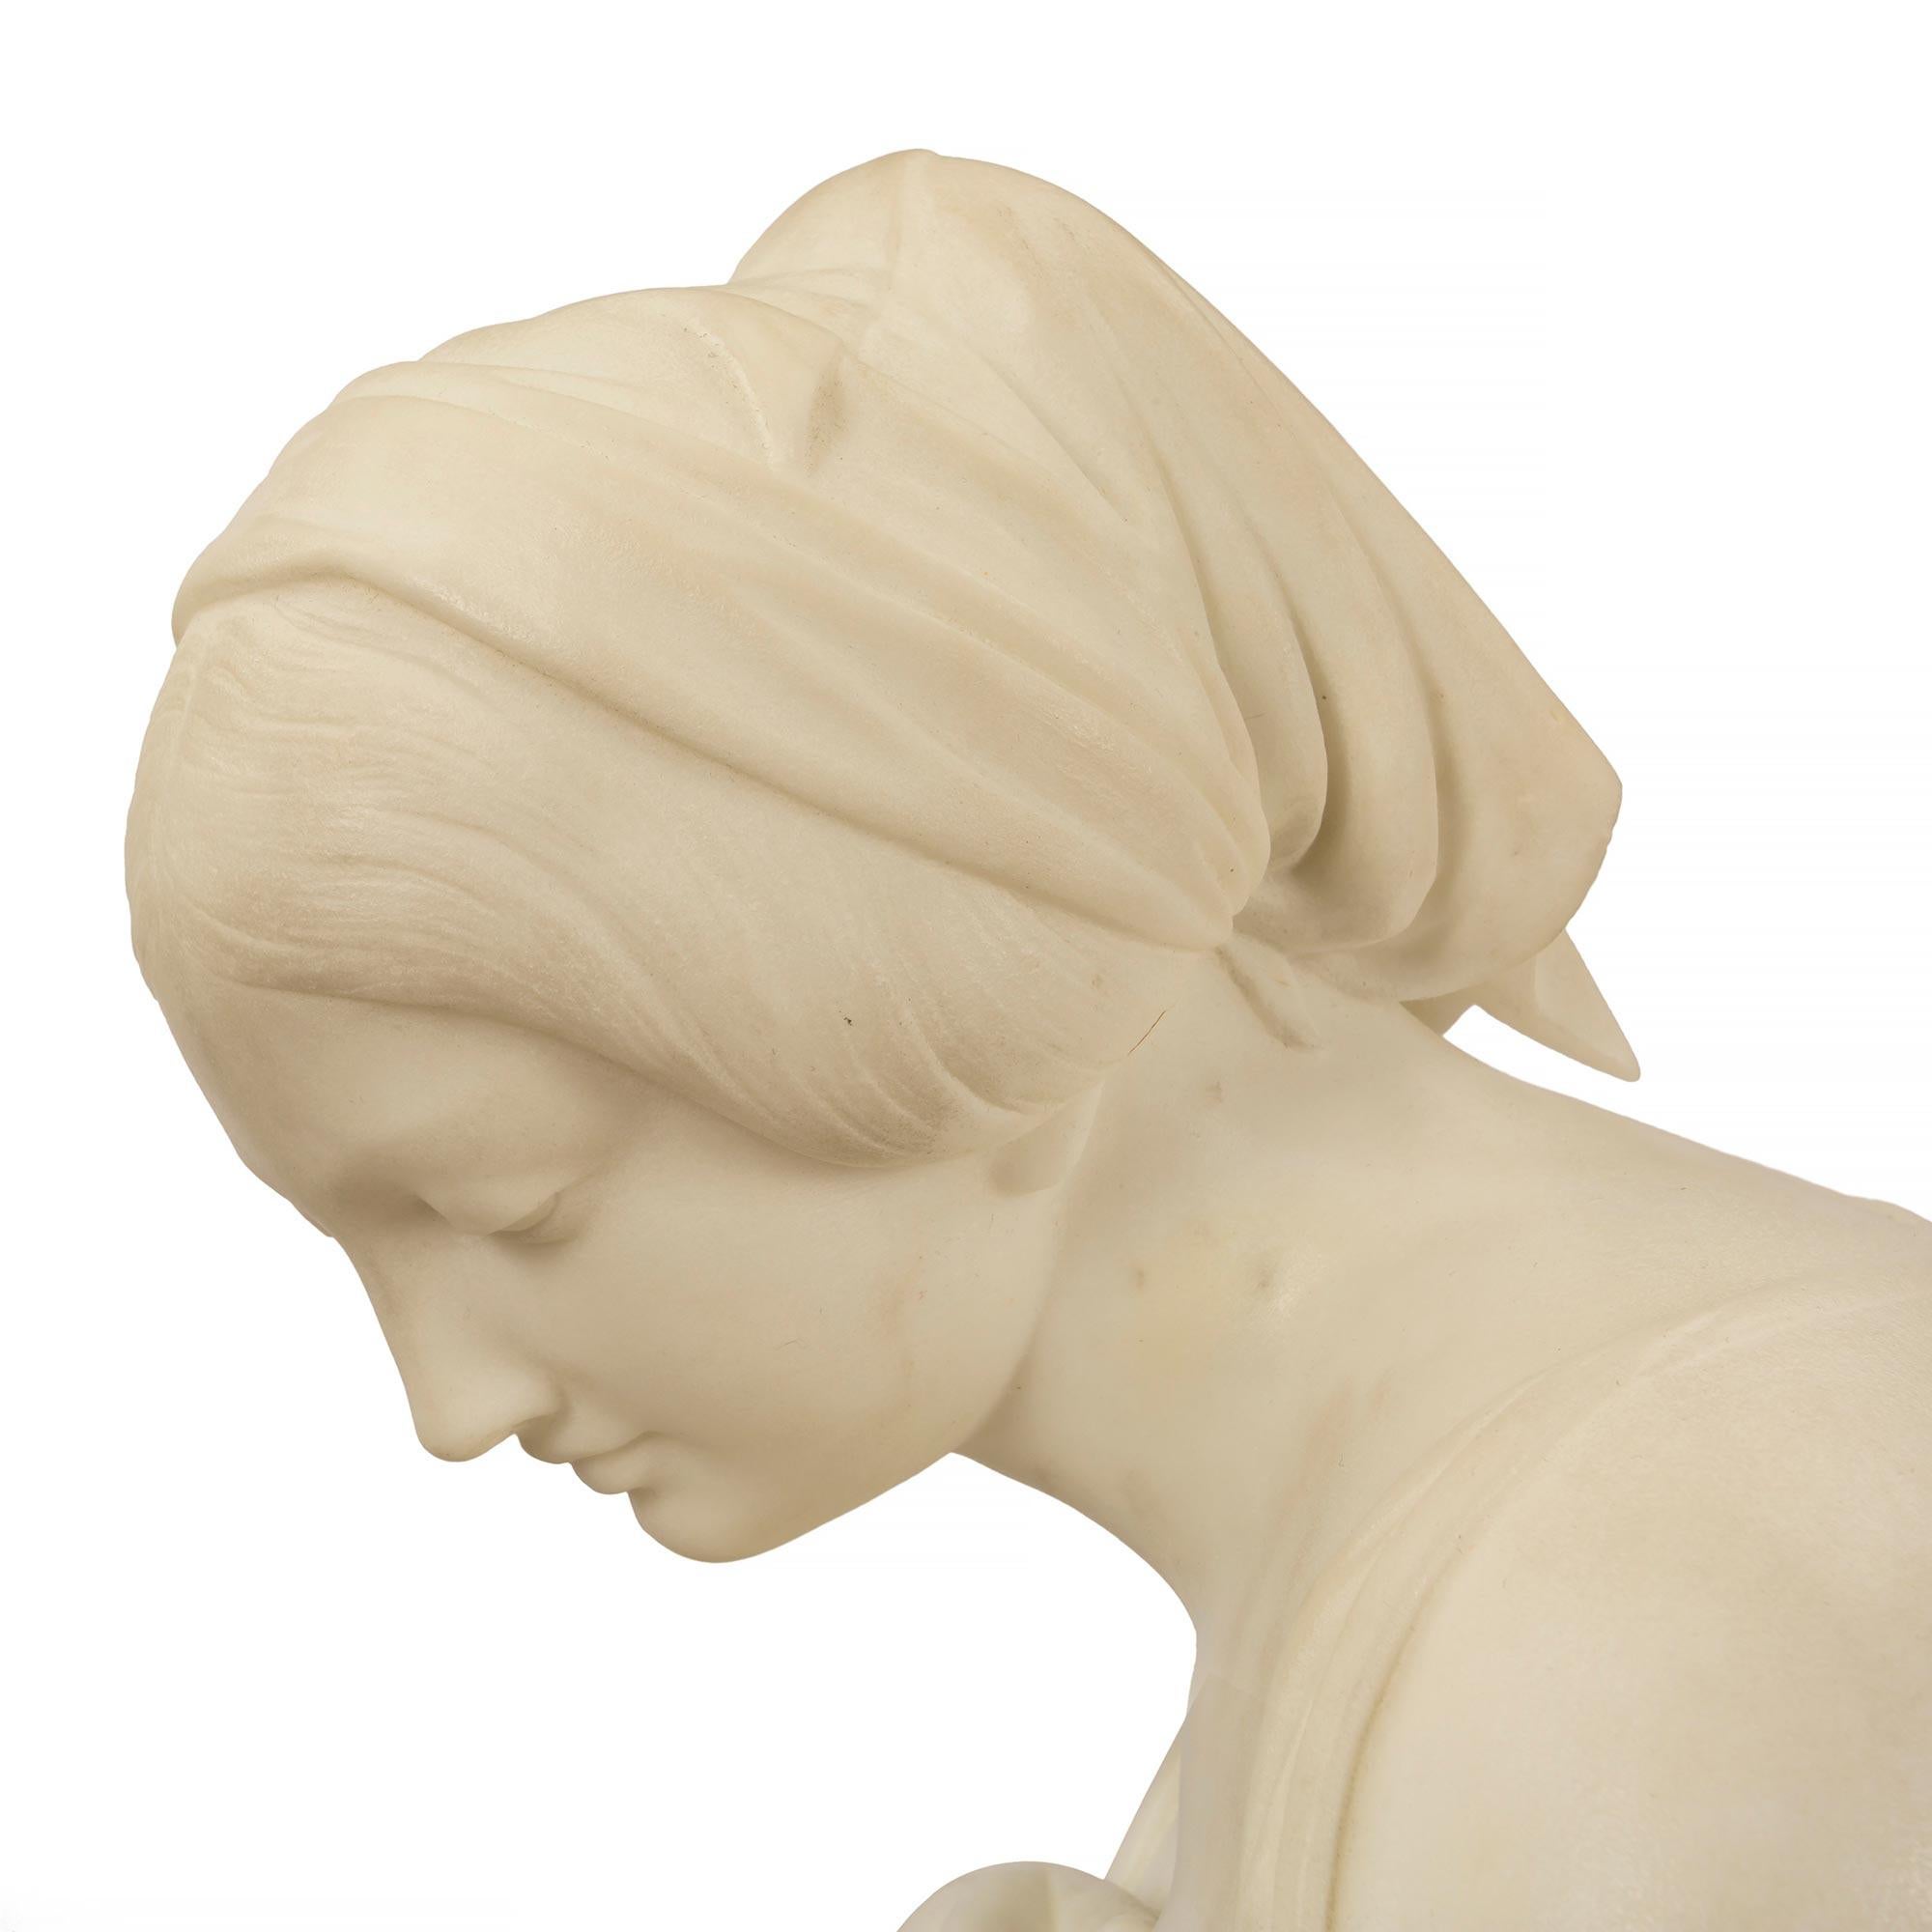 Italian 19th Century Carrara Marble Statue of Mother and Child, Signed Franchi For Sale 6